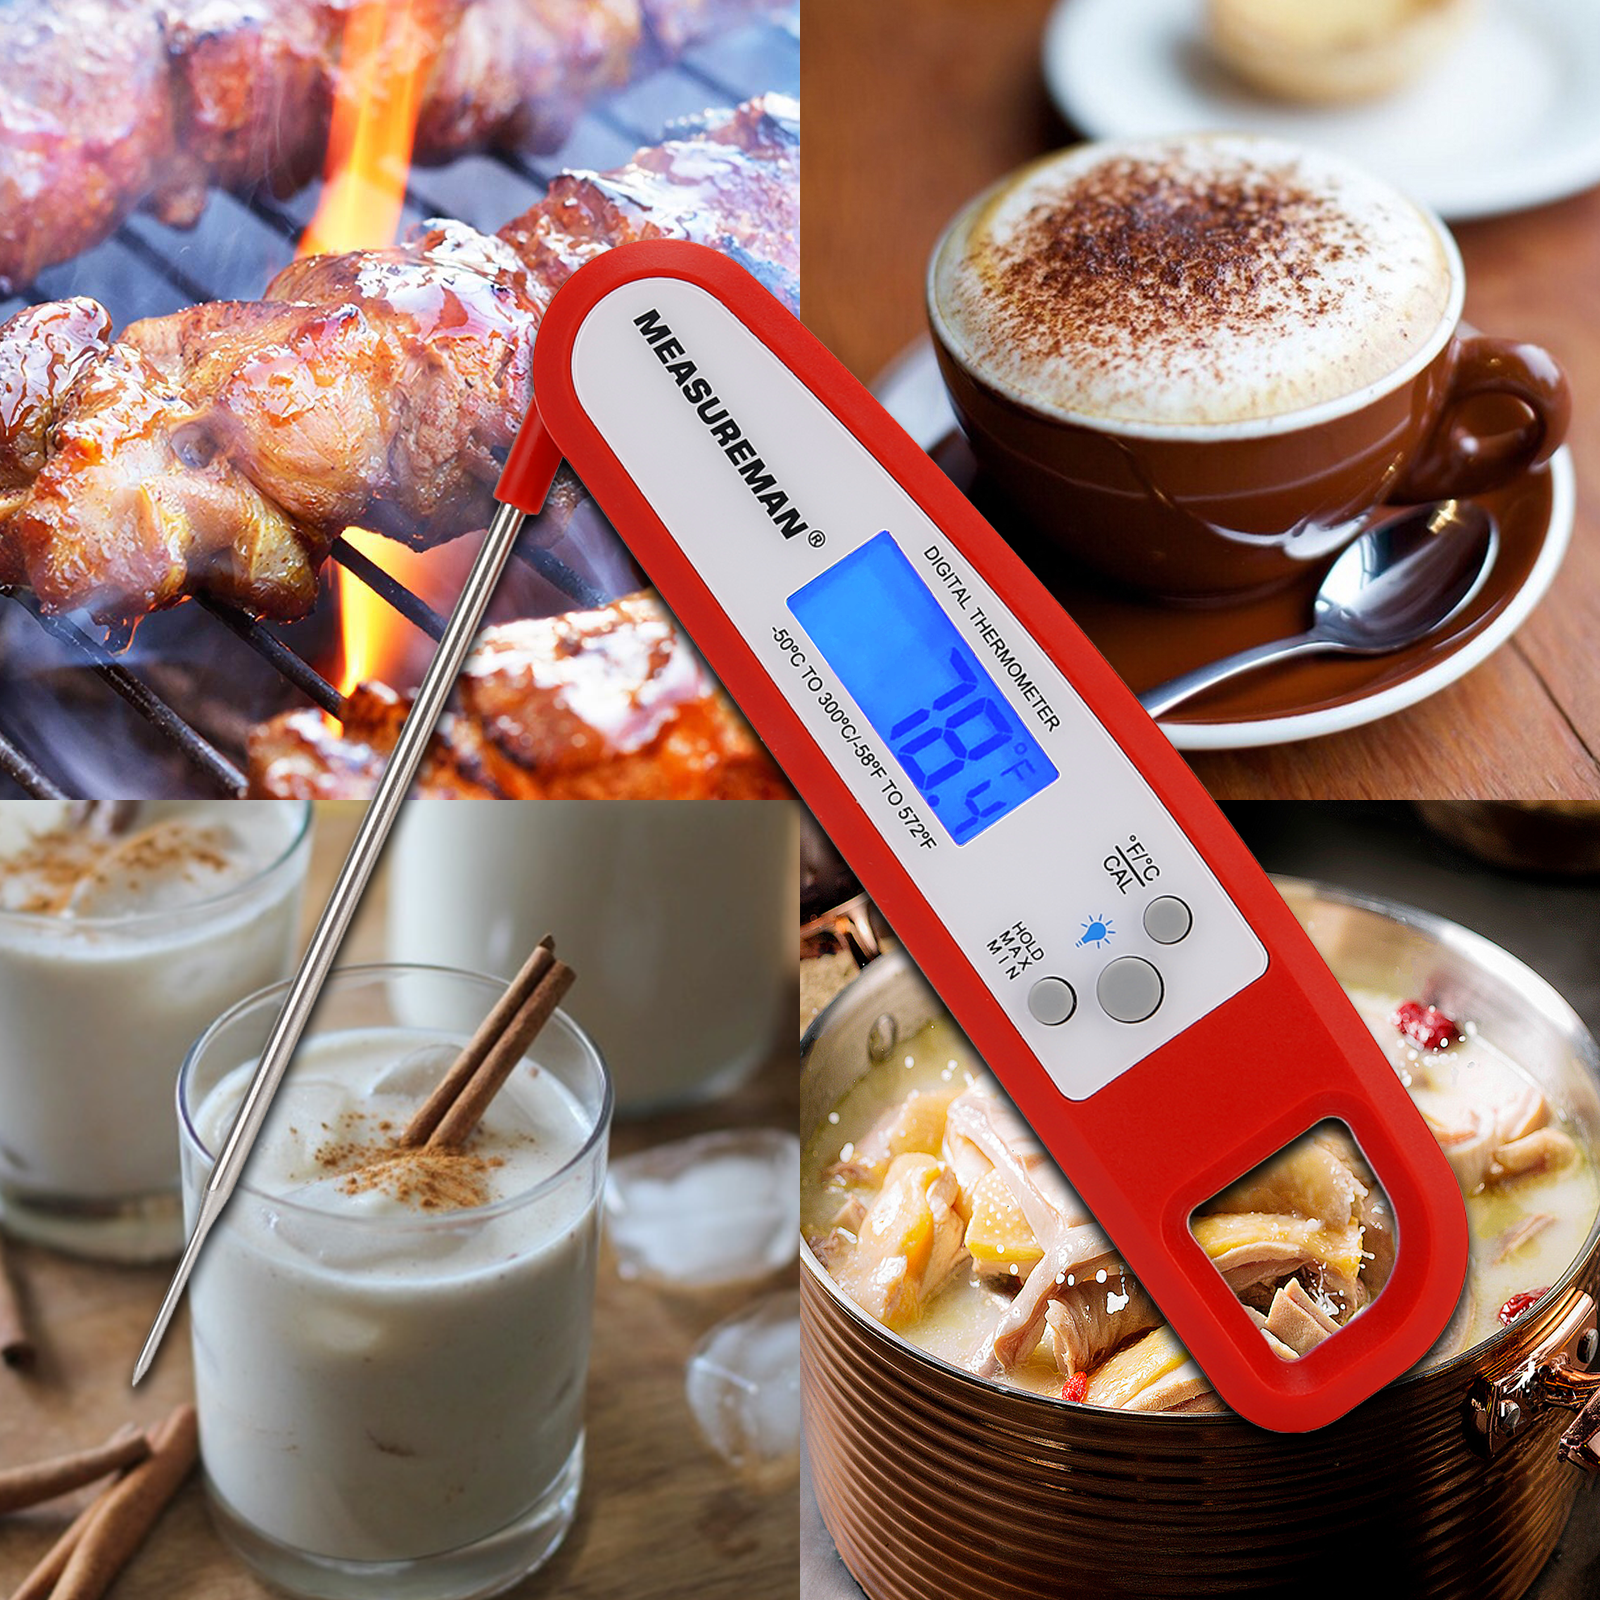 Rapid Meat Thermometer, Instant Read Precise Digital Food Thermometer for  Cooking Meat, Candy, Waterproof Kitchen, BBQ Grill, Smoker, Deep Fry, with